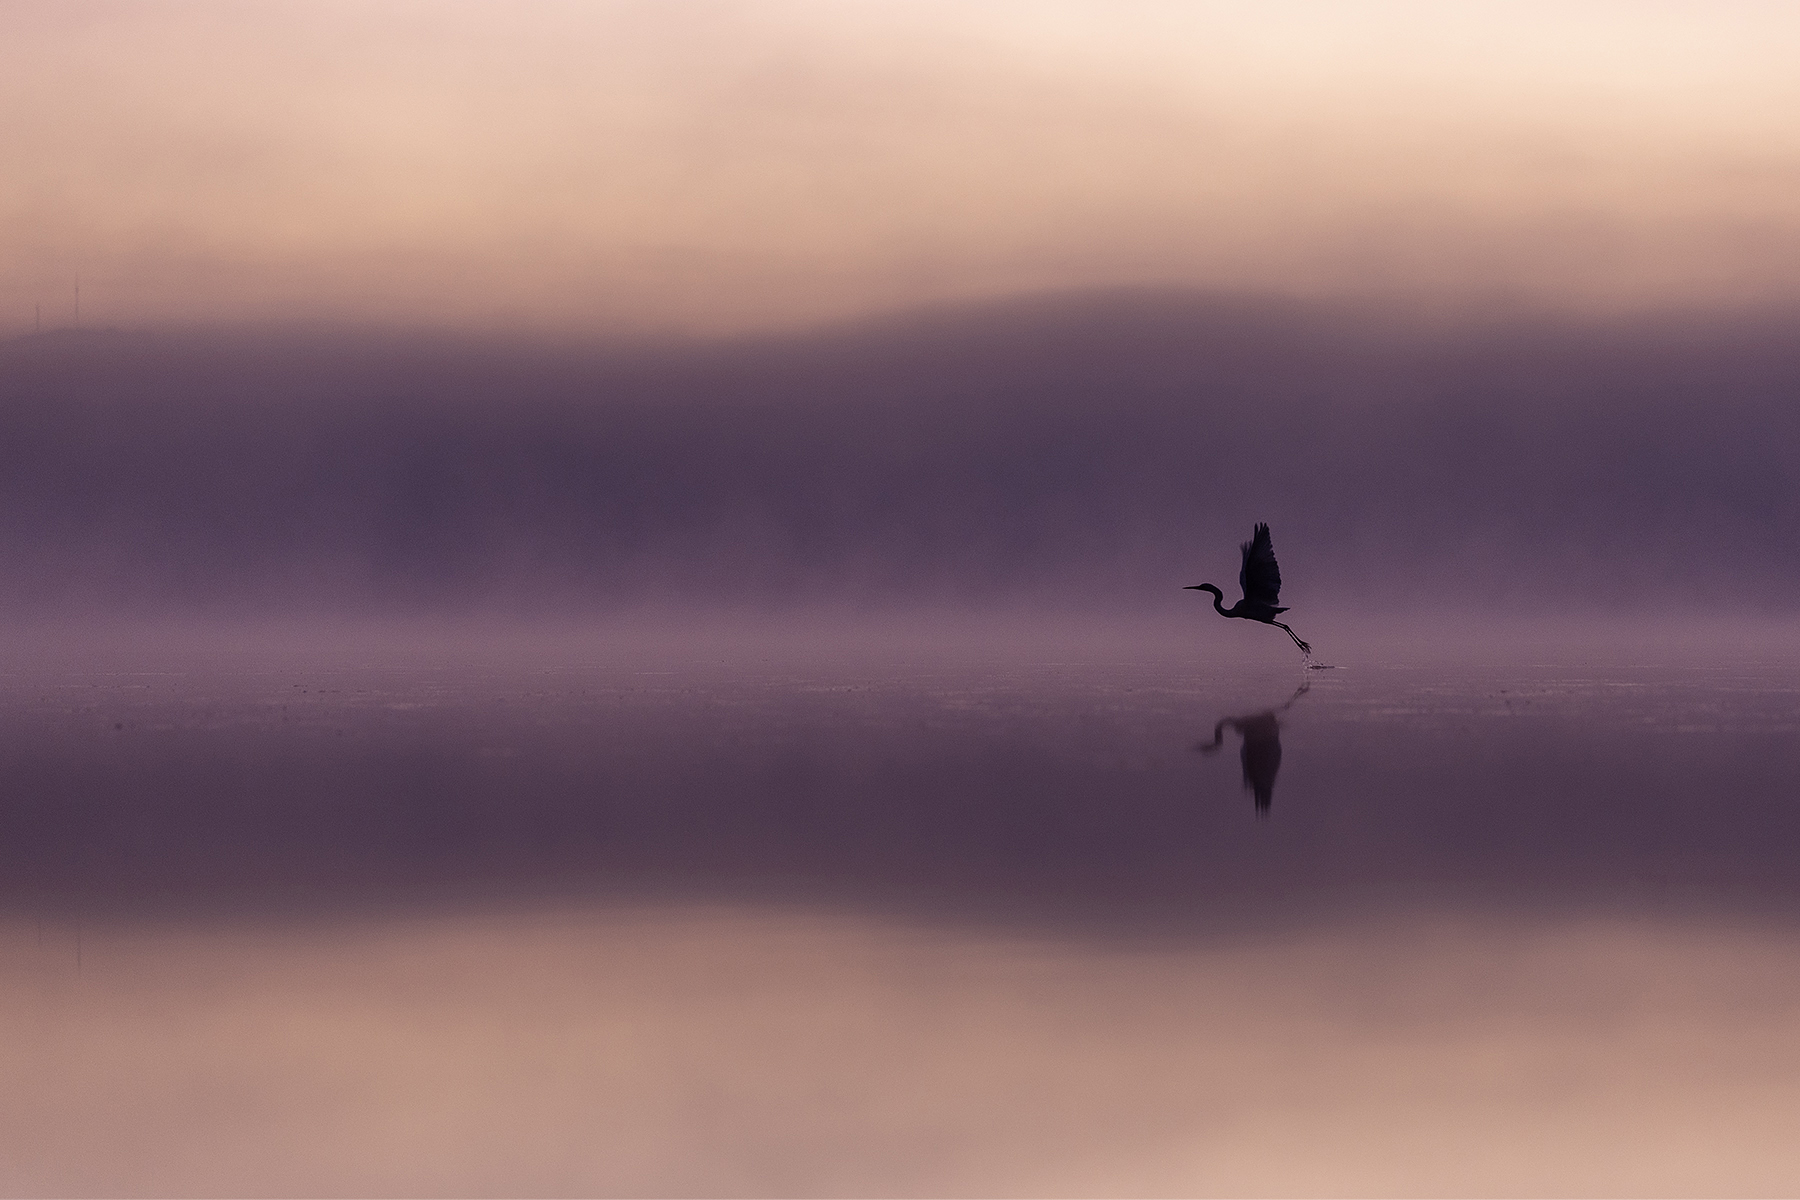 To the right of the frame, a silhouetted Great Egret takes off from the surface of the water against a misty pink and purple sunrise reflected in the water.